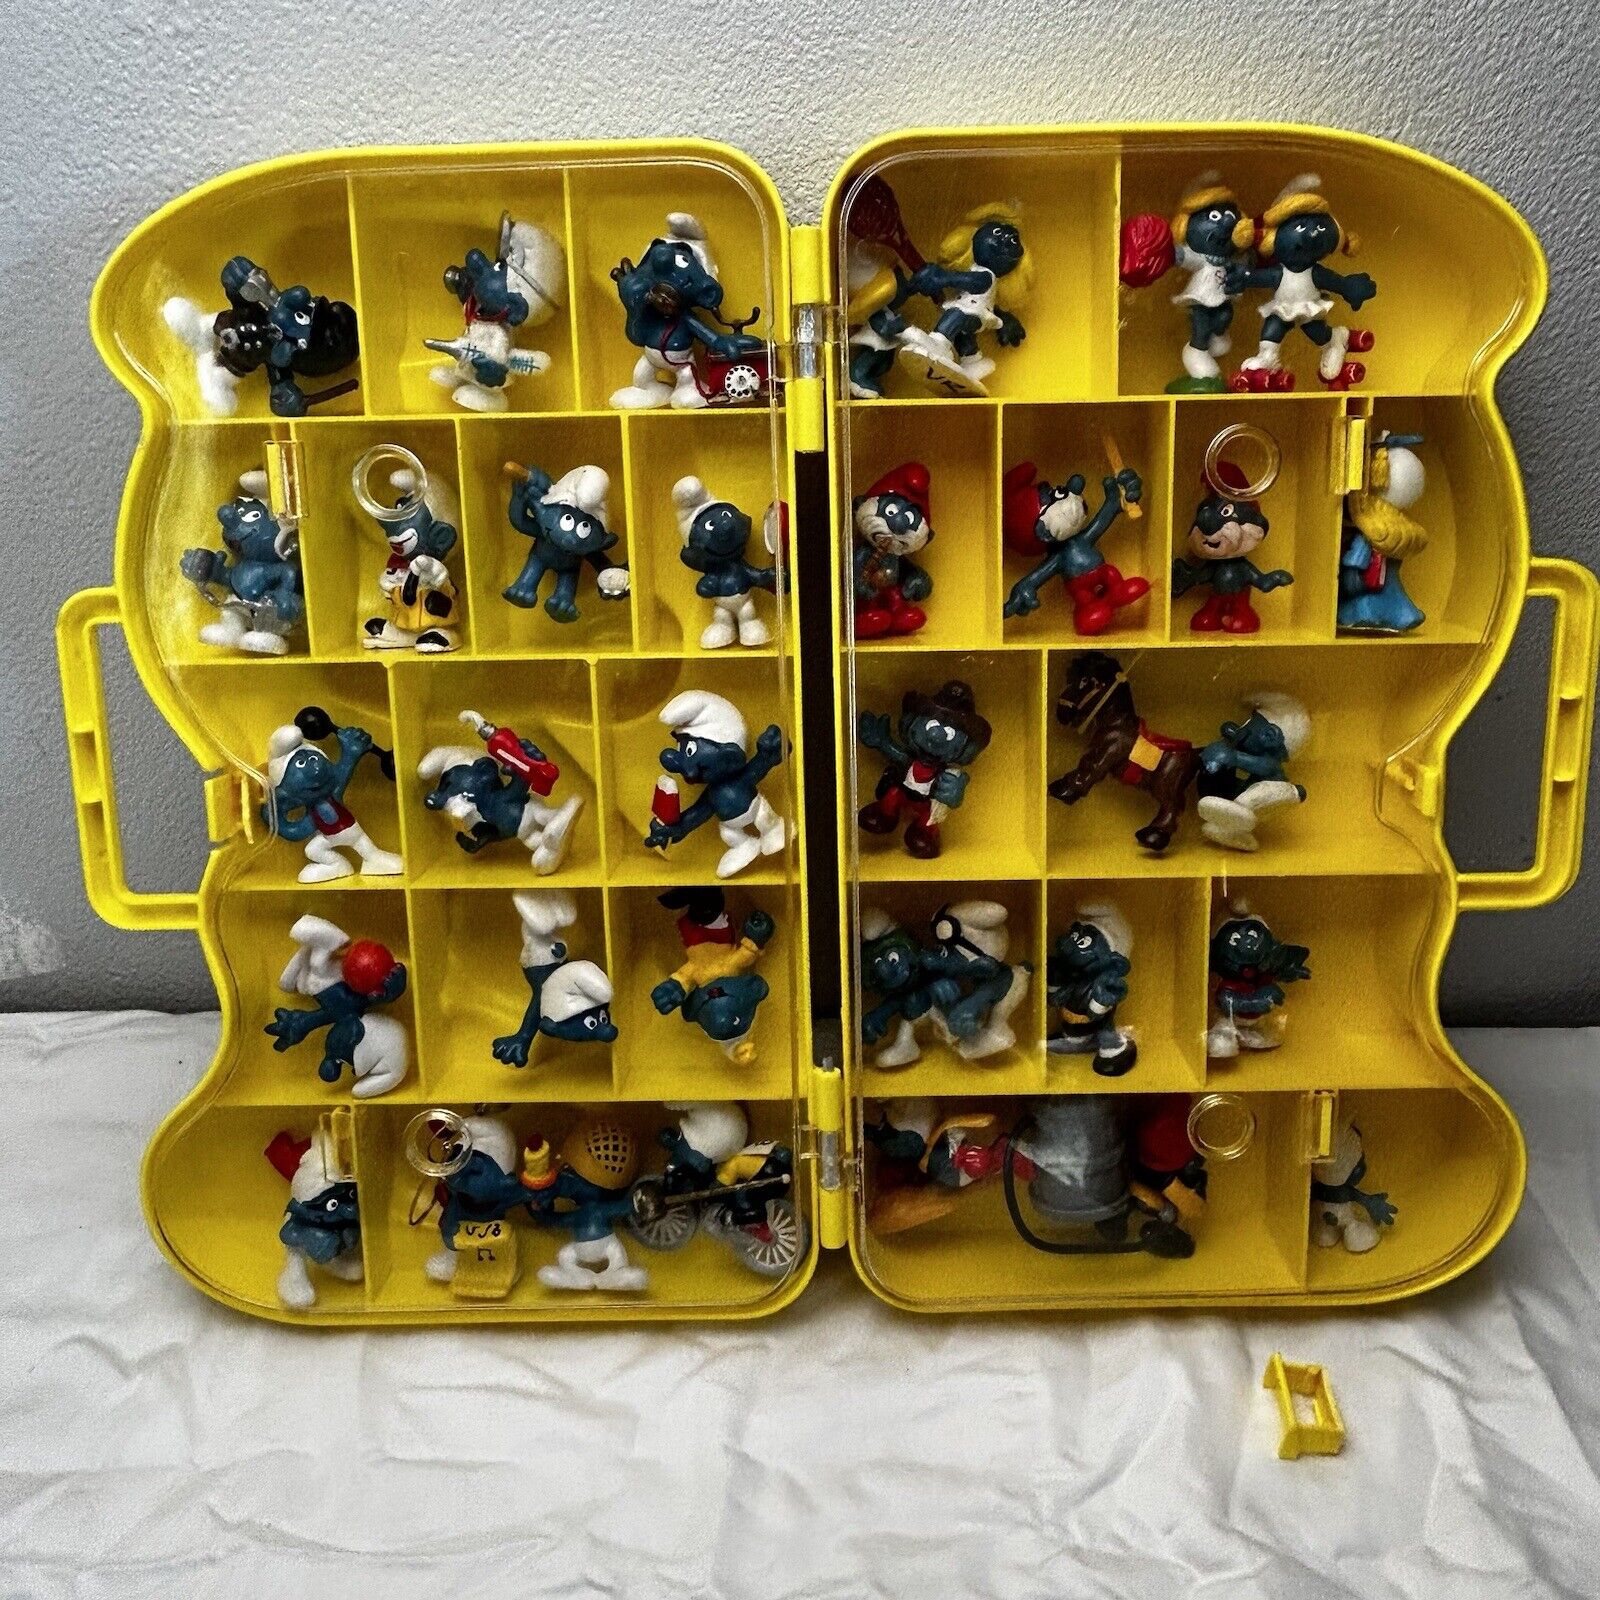 Smurf Yellow Carrying Case + 39 Figures